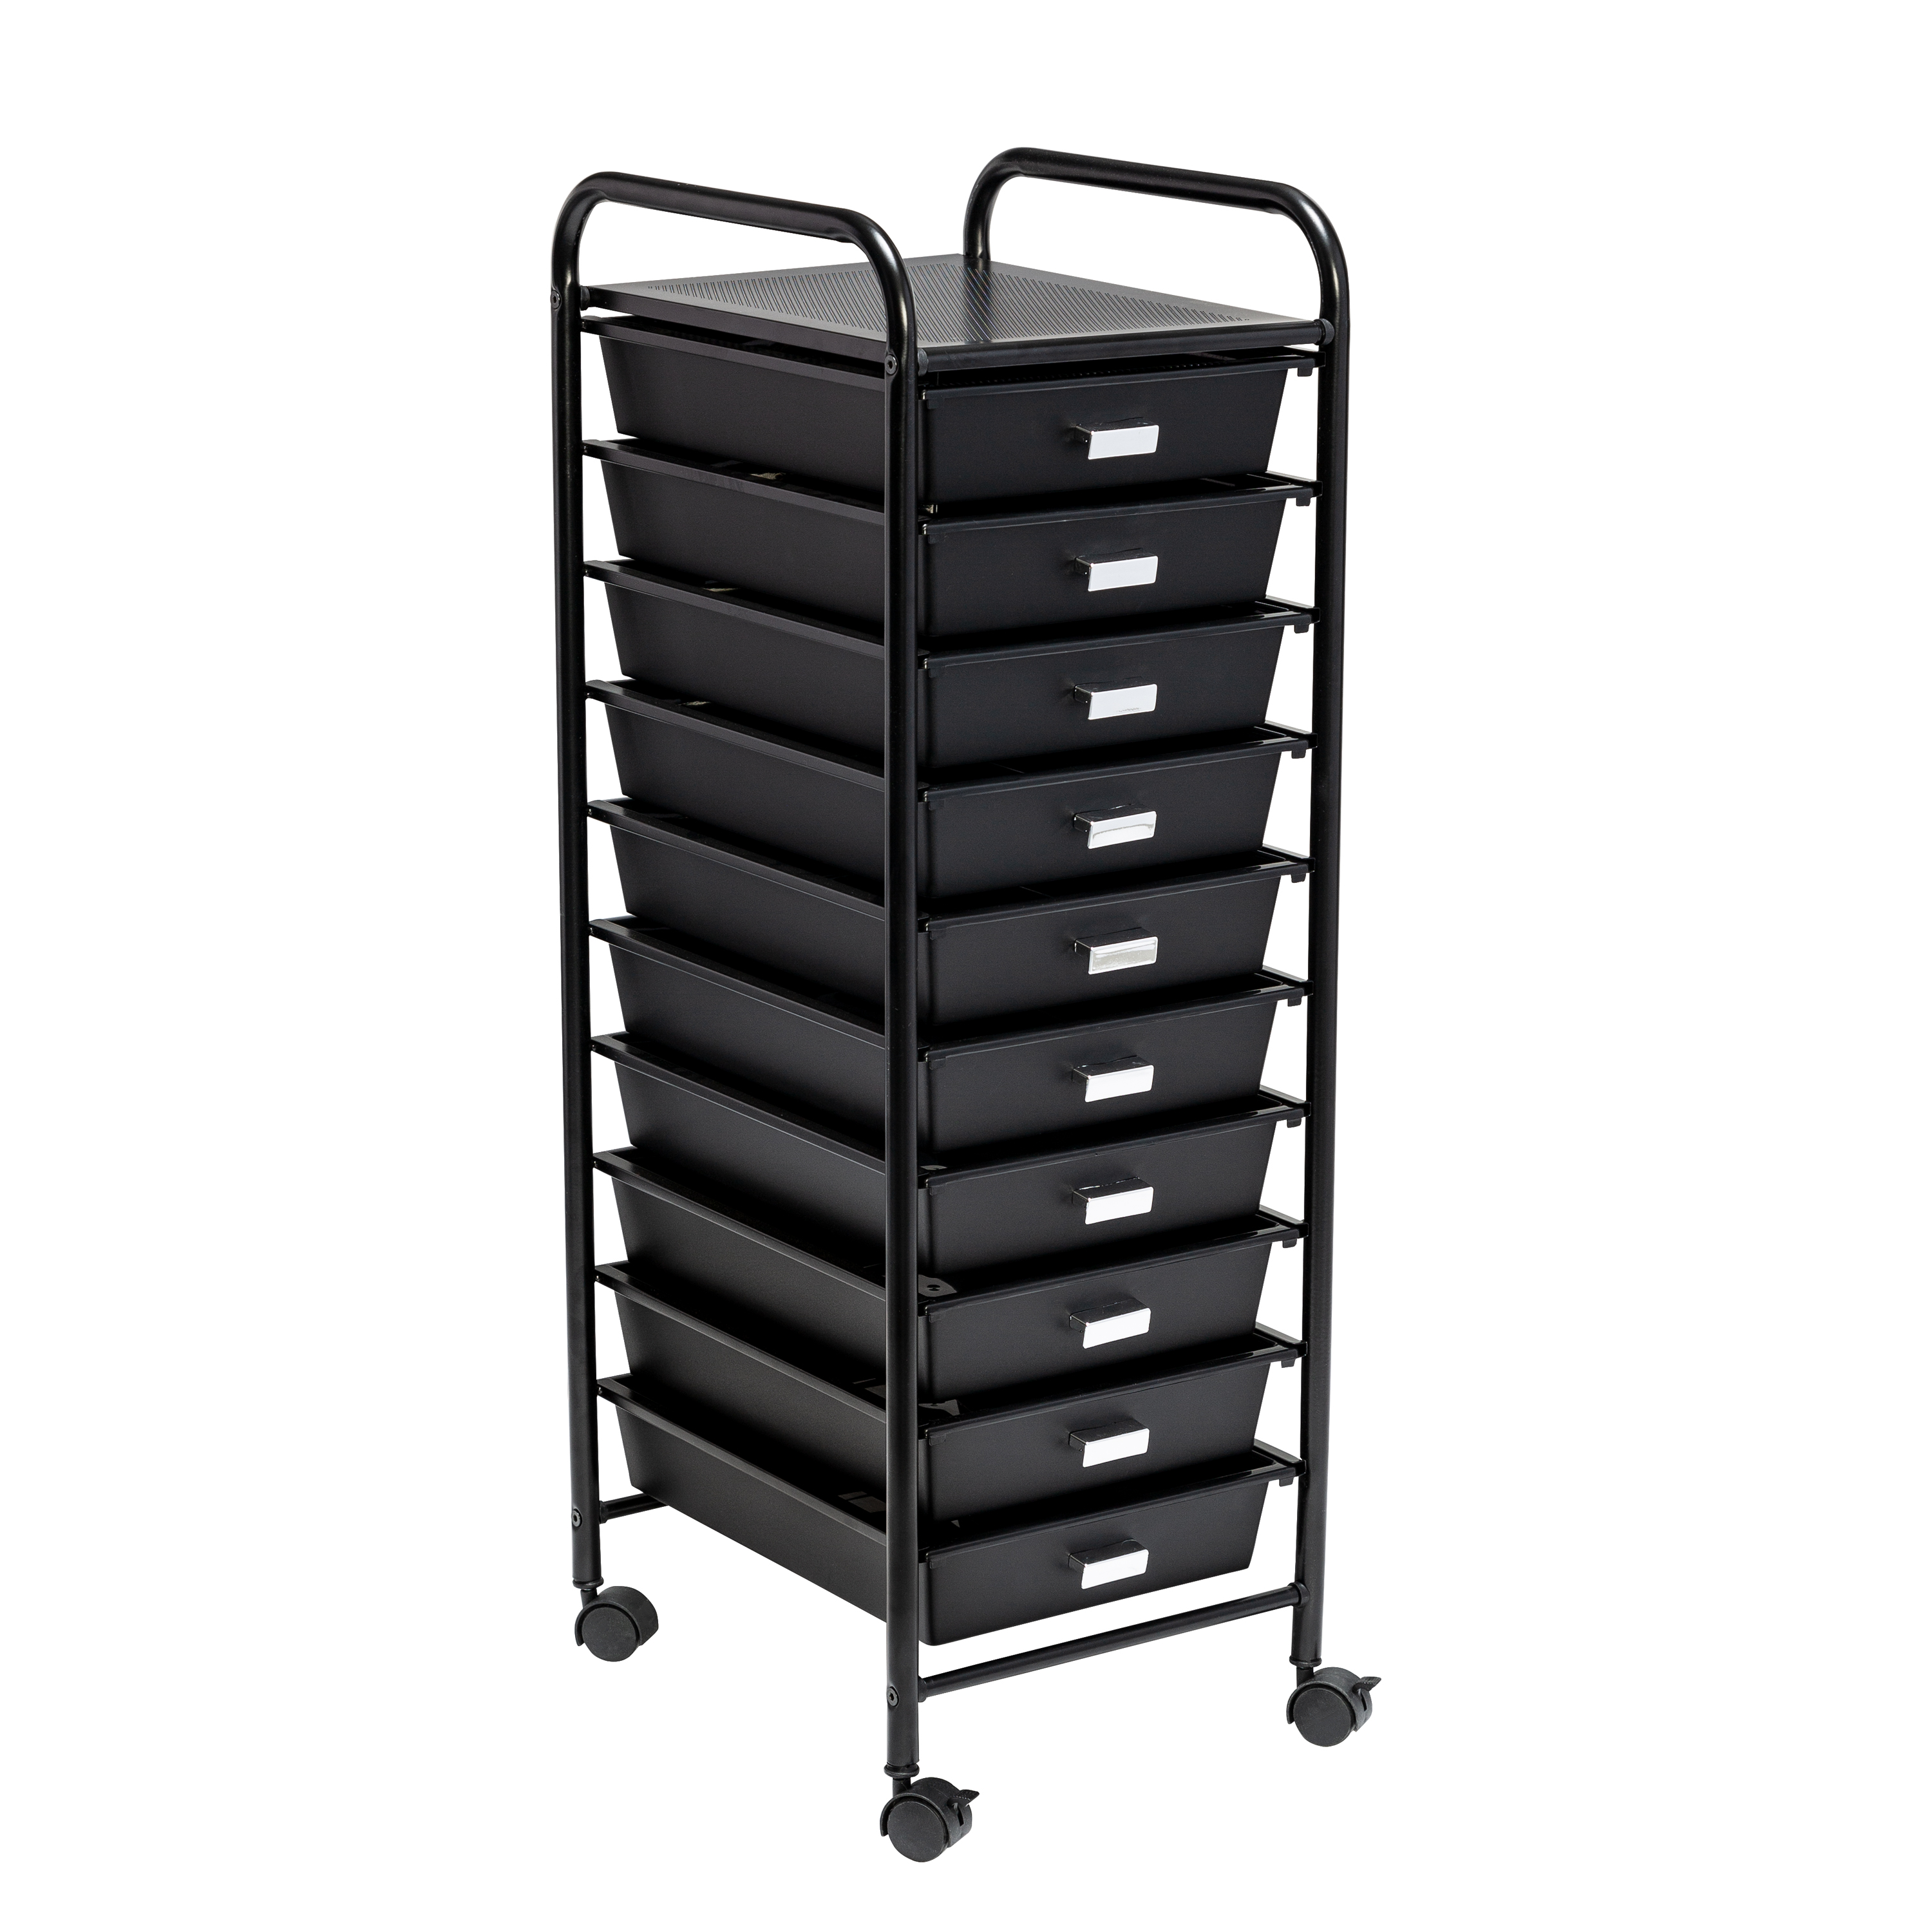 Honey-Can-Do Metal Frame Rolling Storage Cart with 10 Plastic Drawers, Black - image 1 of 9